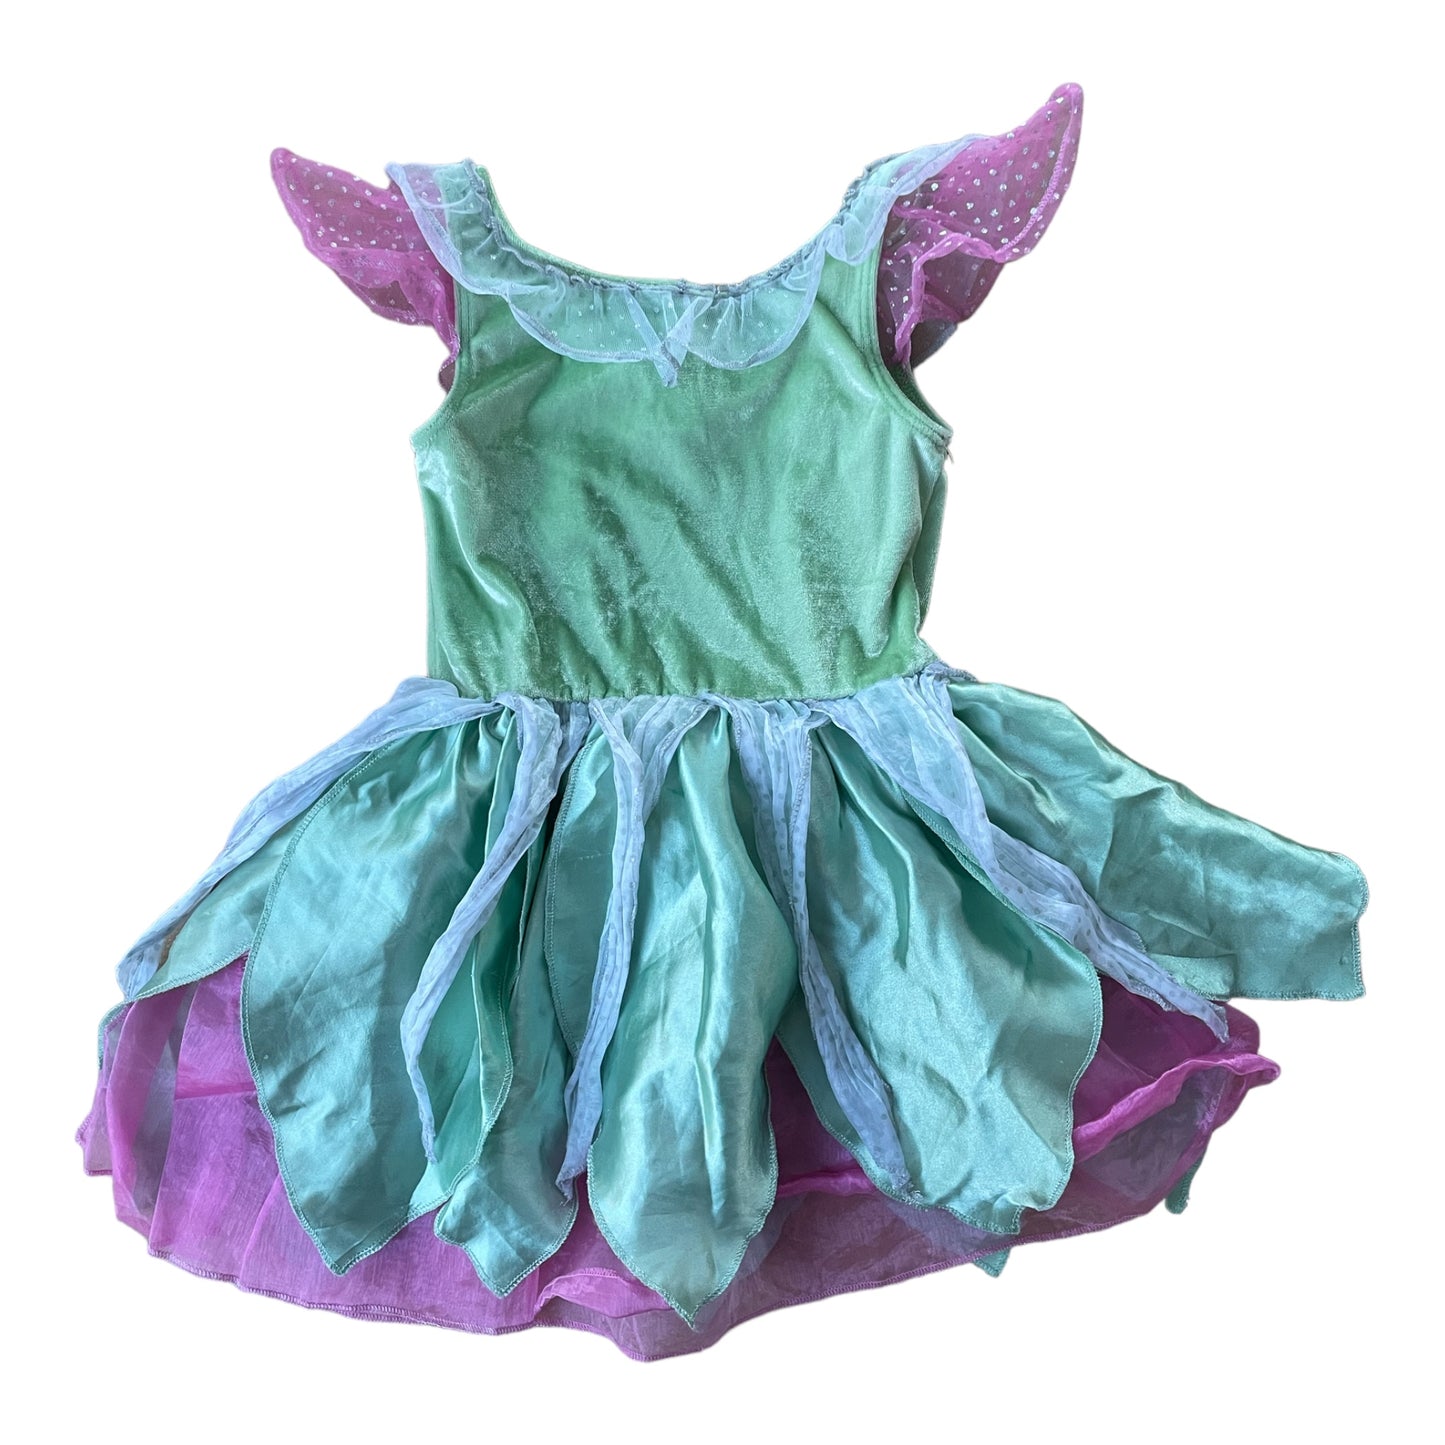 HM Green and Pink Princes Dress (2/4 years old, 98-104cm)